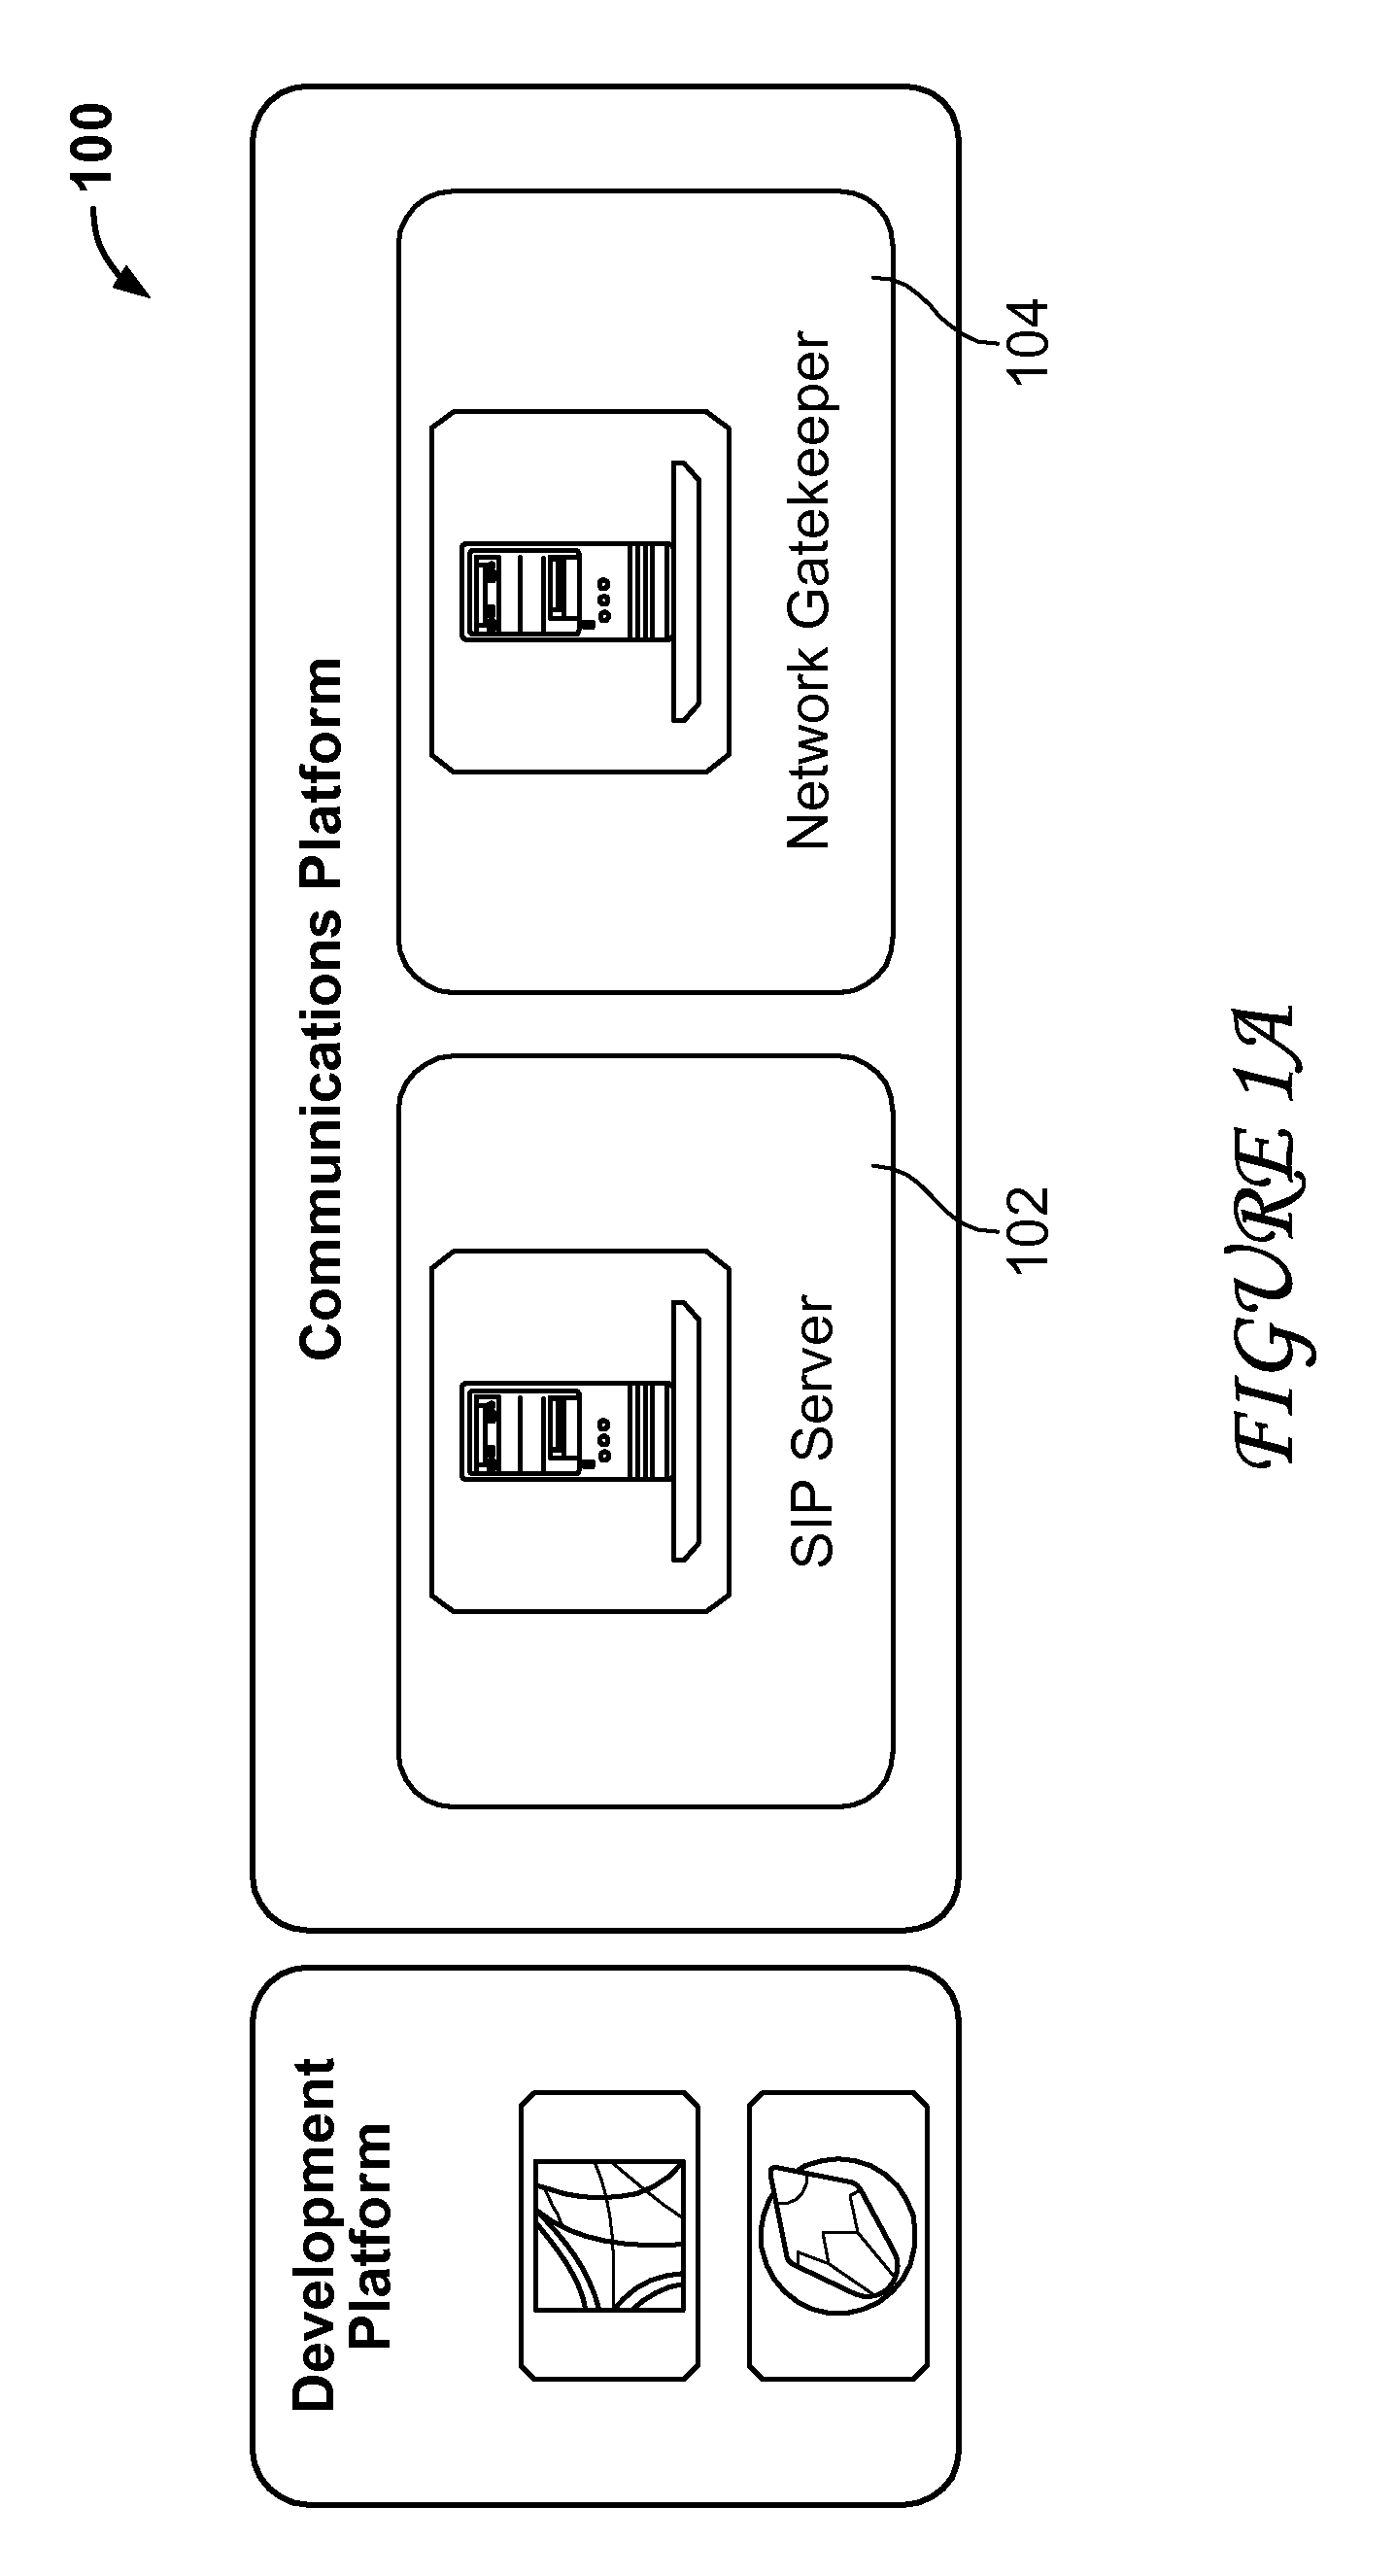 Diameter protocol and SH interface support for SIP server architecture